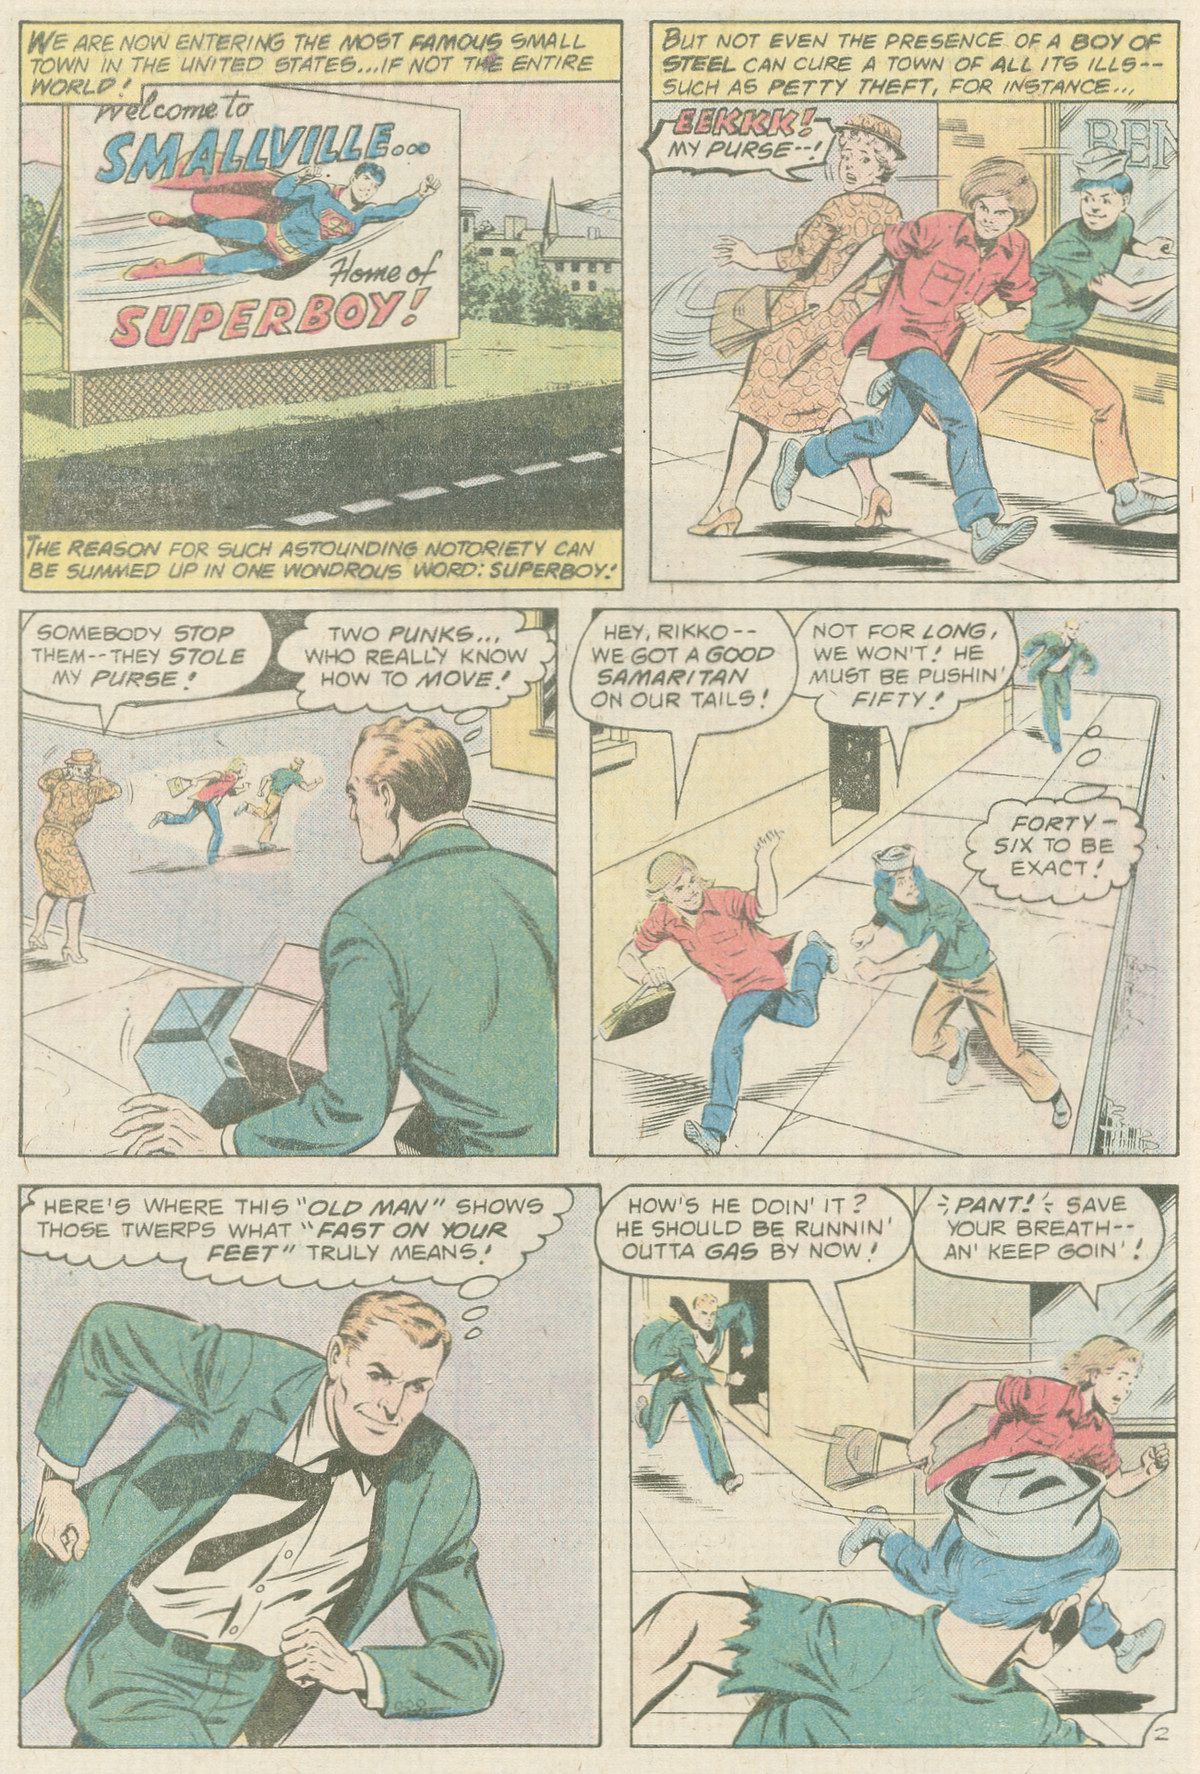 The New Adventures of Superboy 16 Page 2